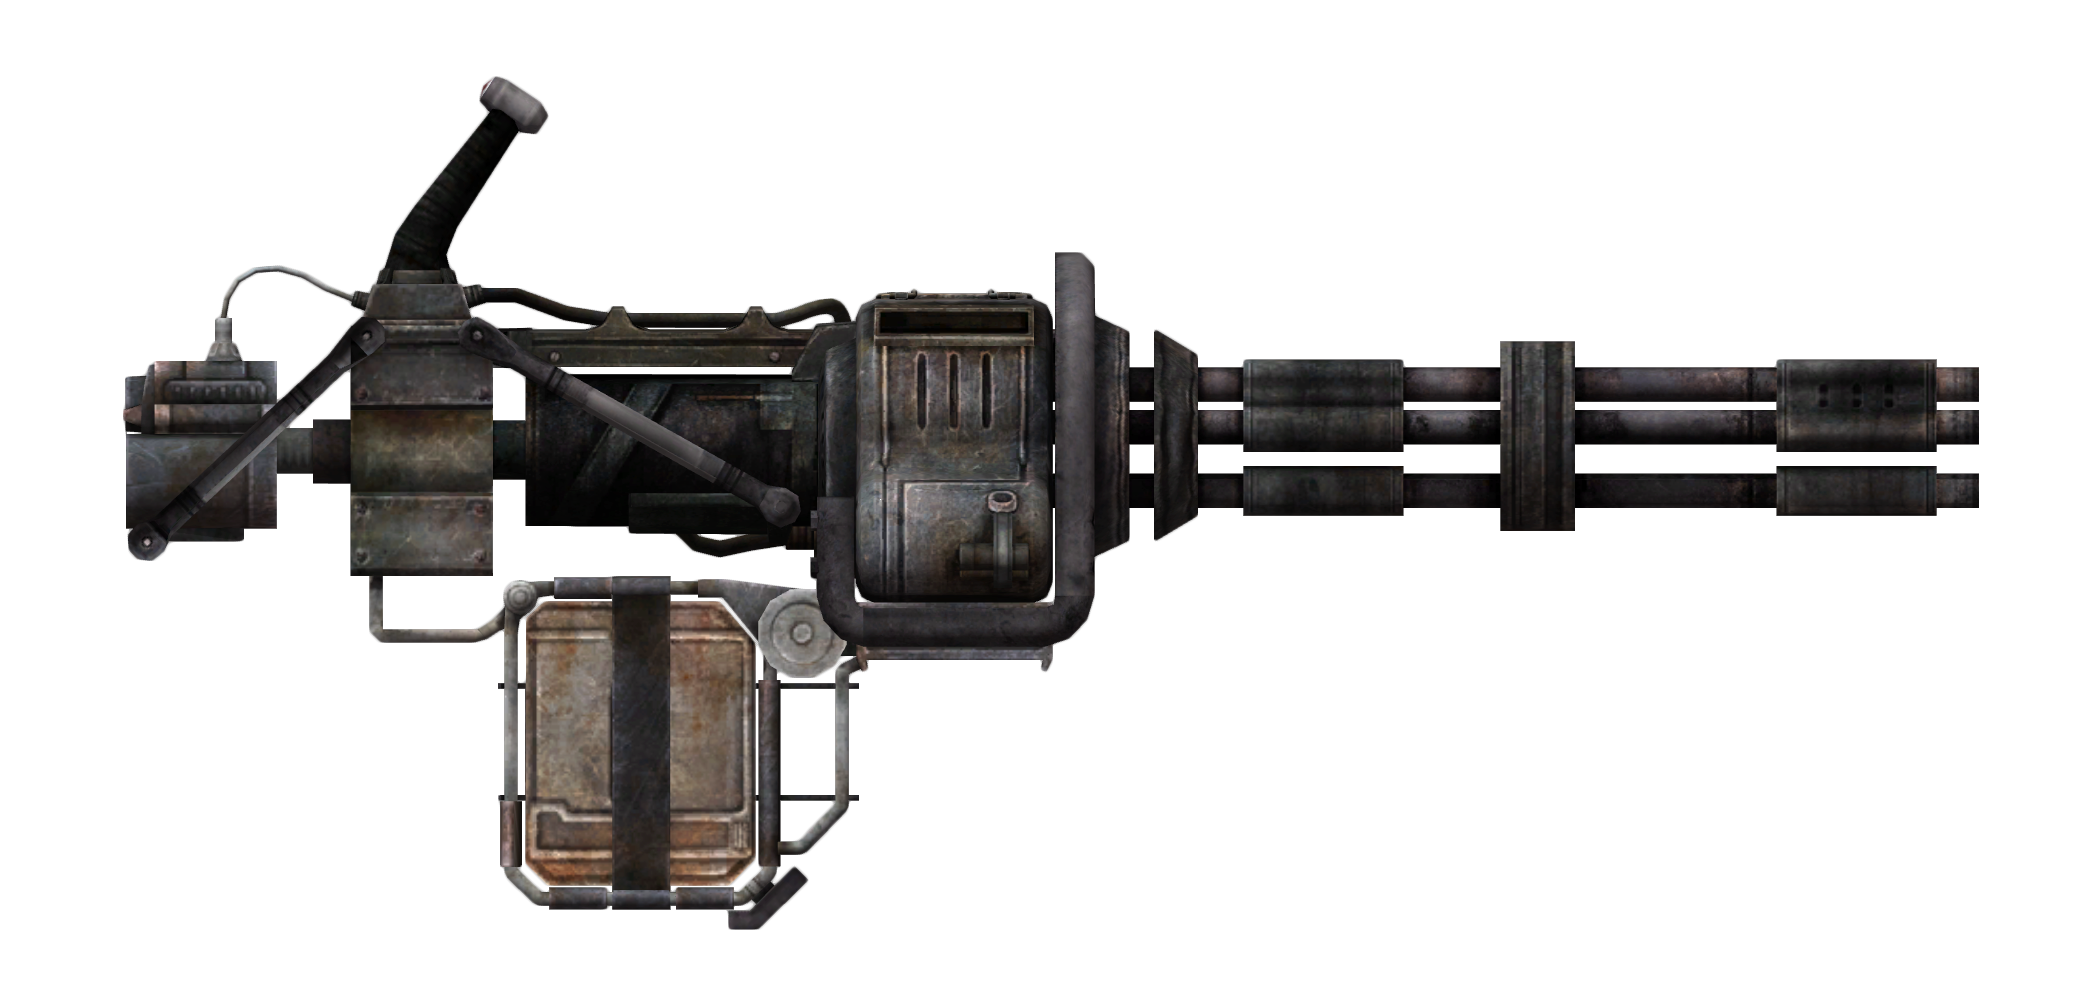 http://vignette4.wikia.nocookie.net/fallout/images/5/5a/5MMMINIGUN.png/revision/latest?cb=20110208173226